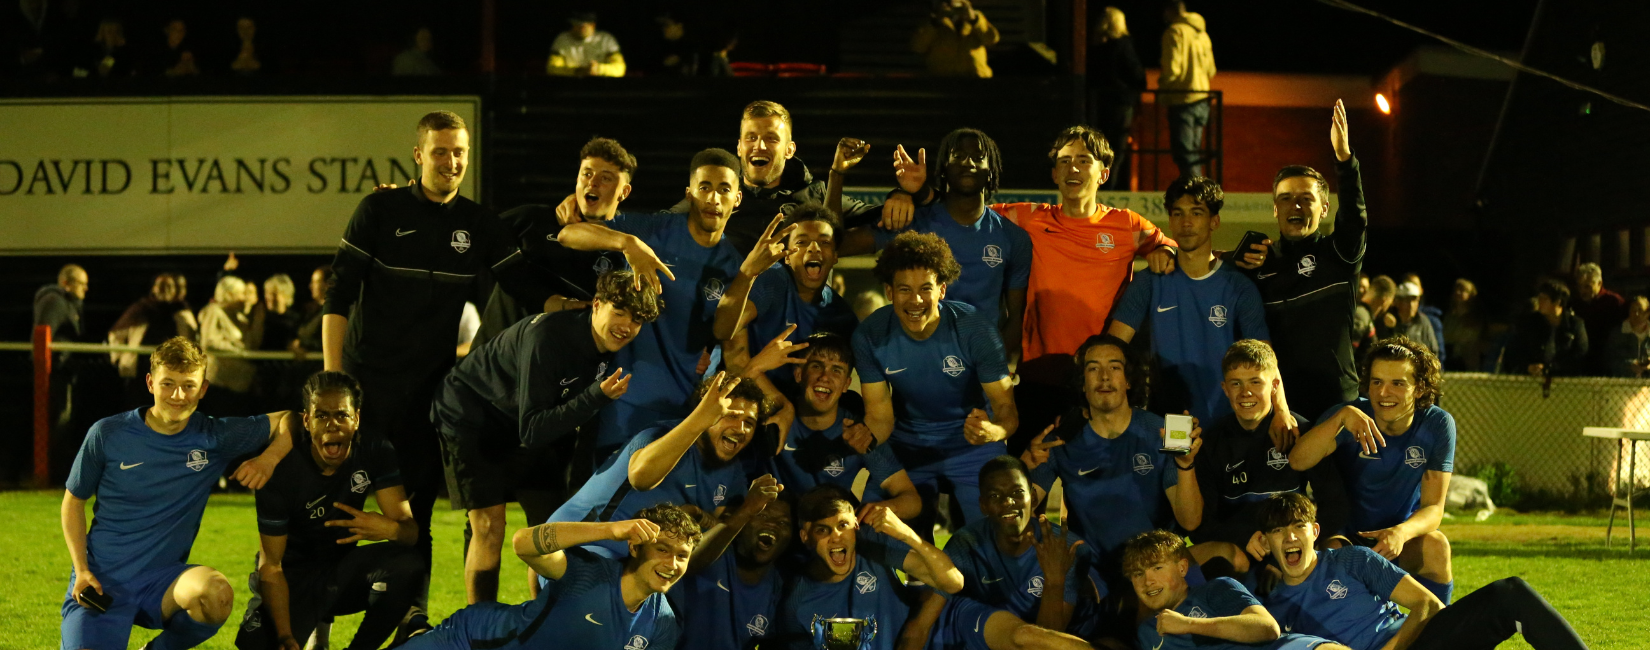 MK College’s Football Academy takes the final